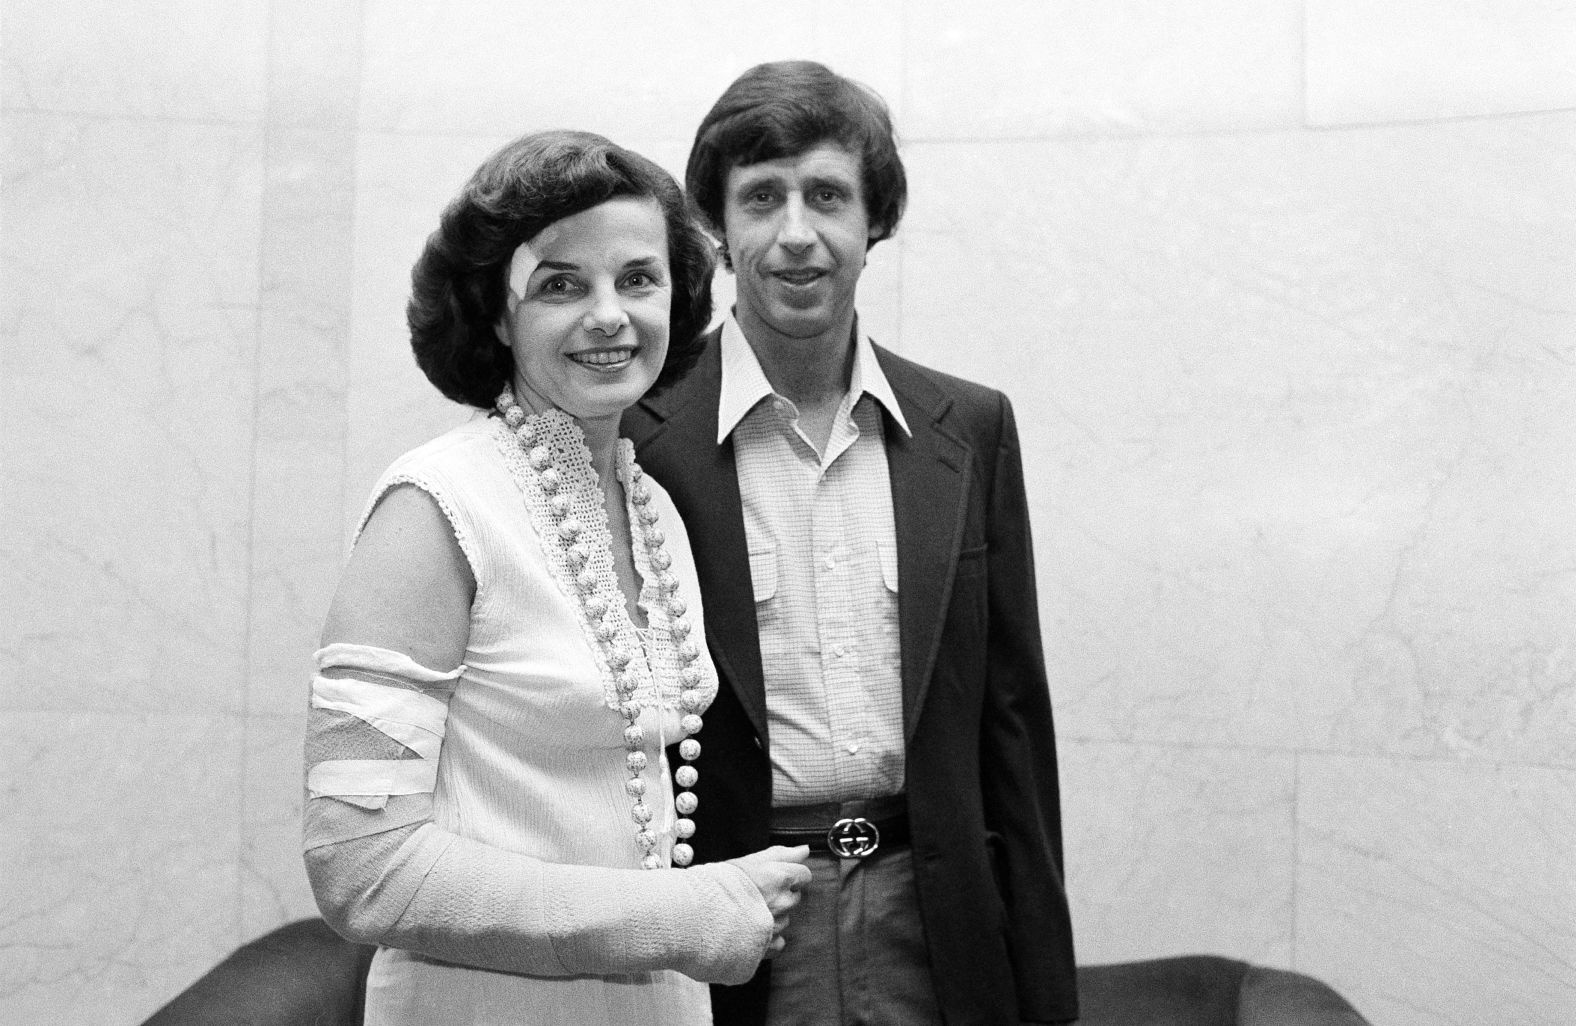 Feinstein poses for a picture with her husband Richard Blum in the lobby of their Washington, DC, hotel in July 1980. Feinstein had fallen and injured herself leaving the White House after a meeting with Vice President Walter Mondale, forcing the delay of the couple's honeymoon.